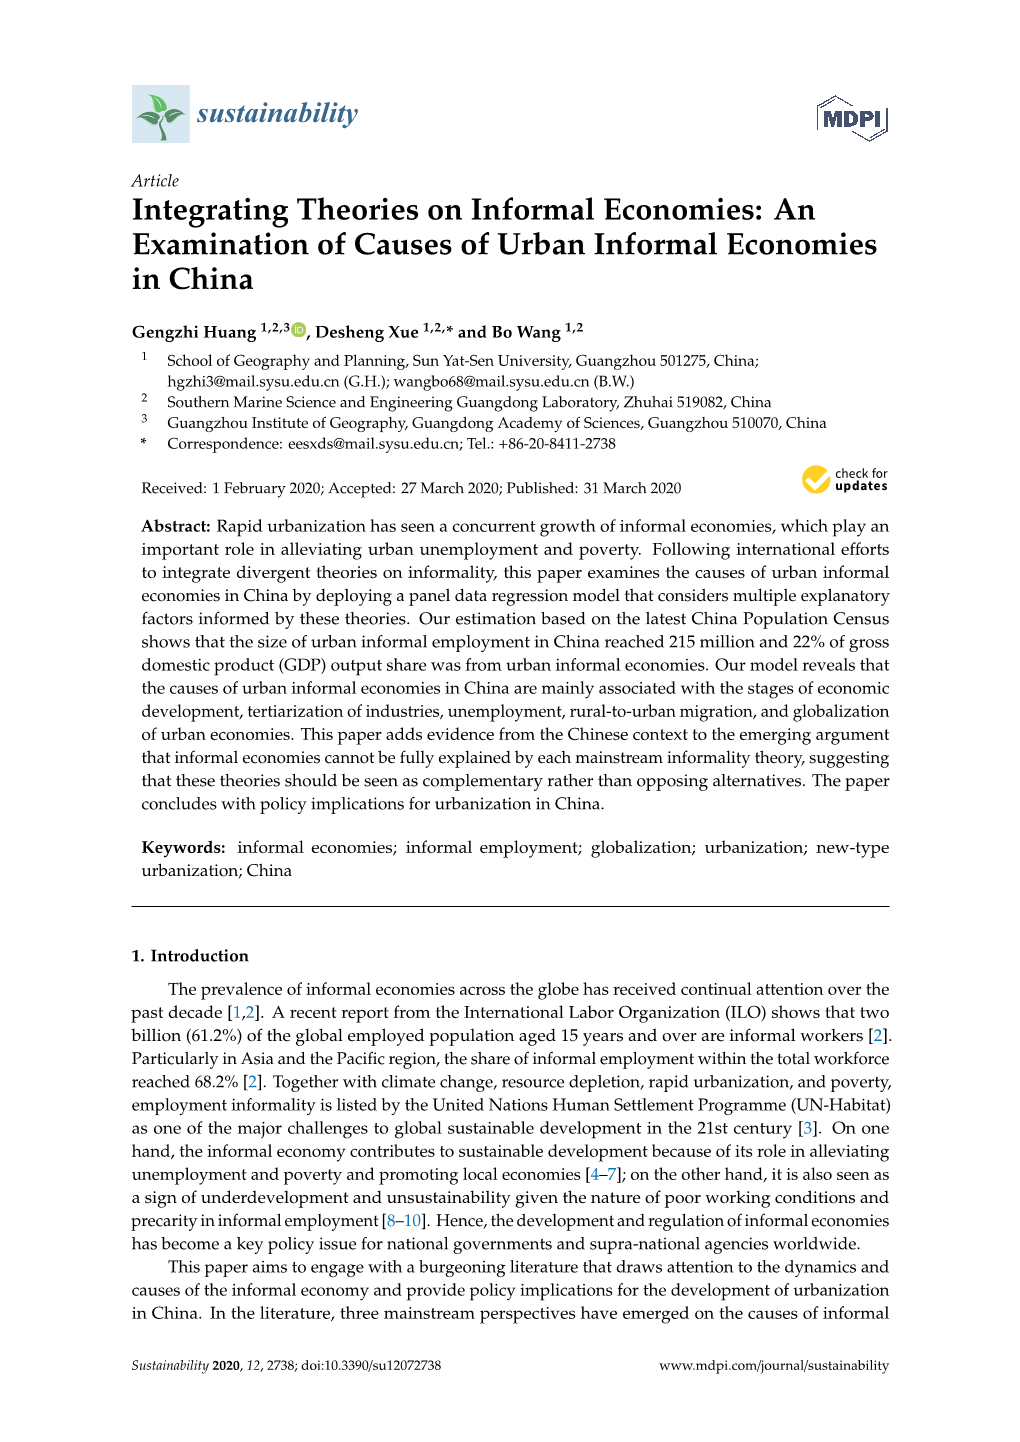 An Examination of Causes of Urban Informal Economies in China